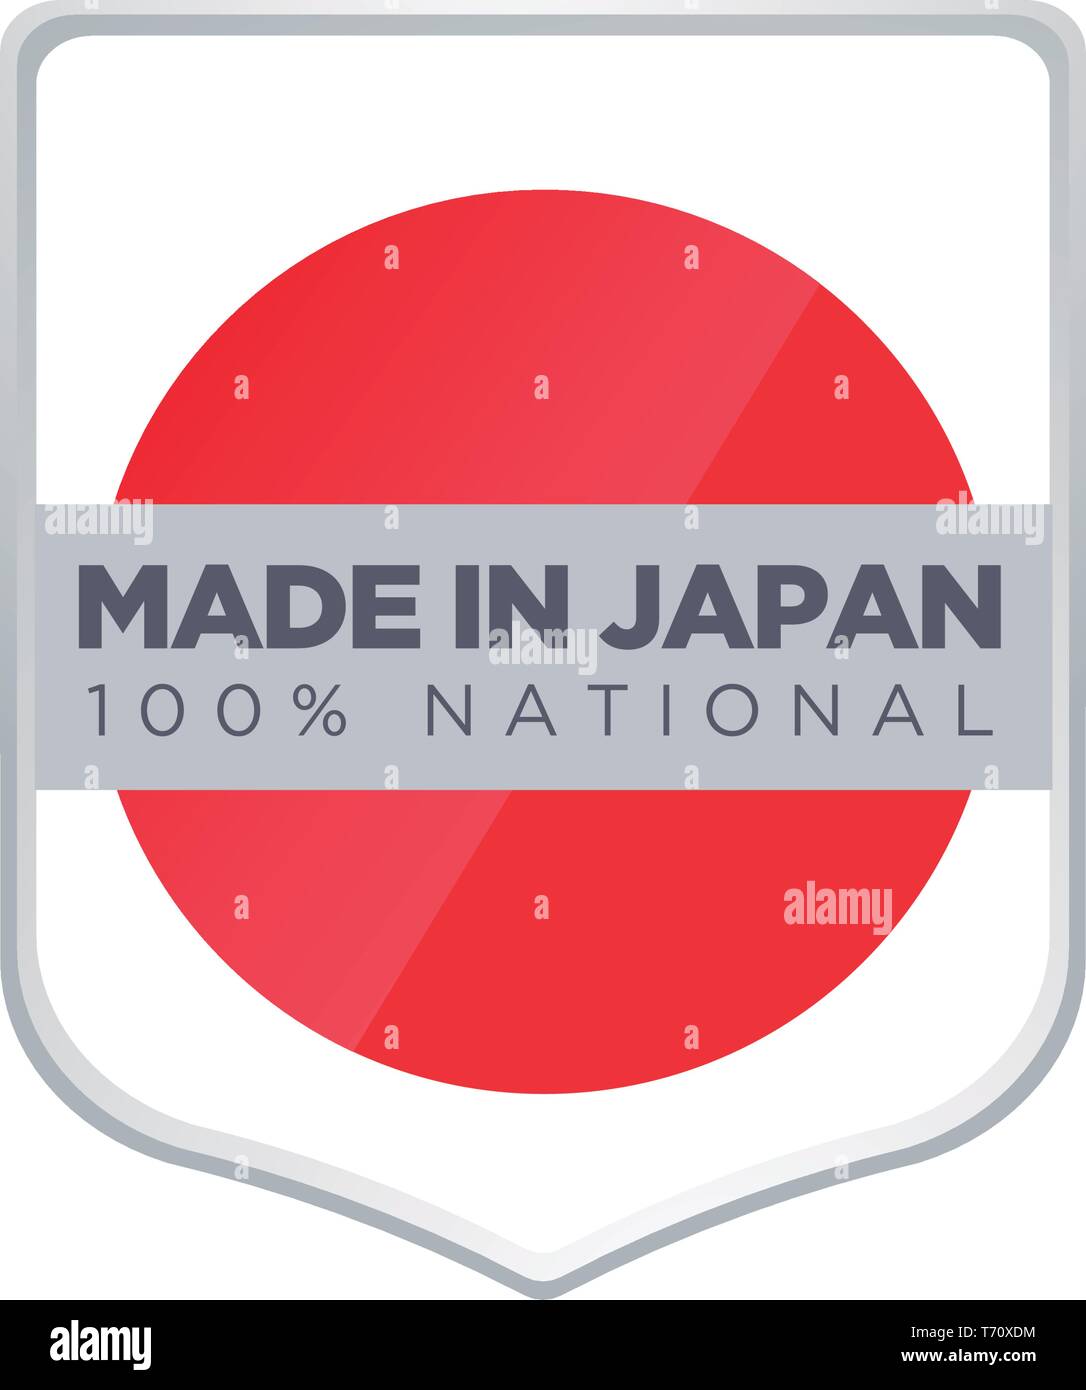 MADE IN JAPAN Stock Vector